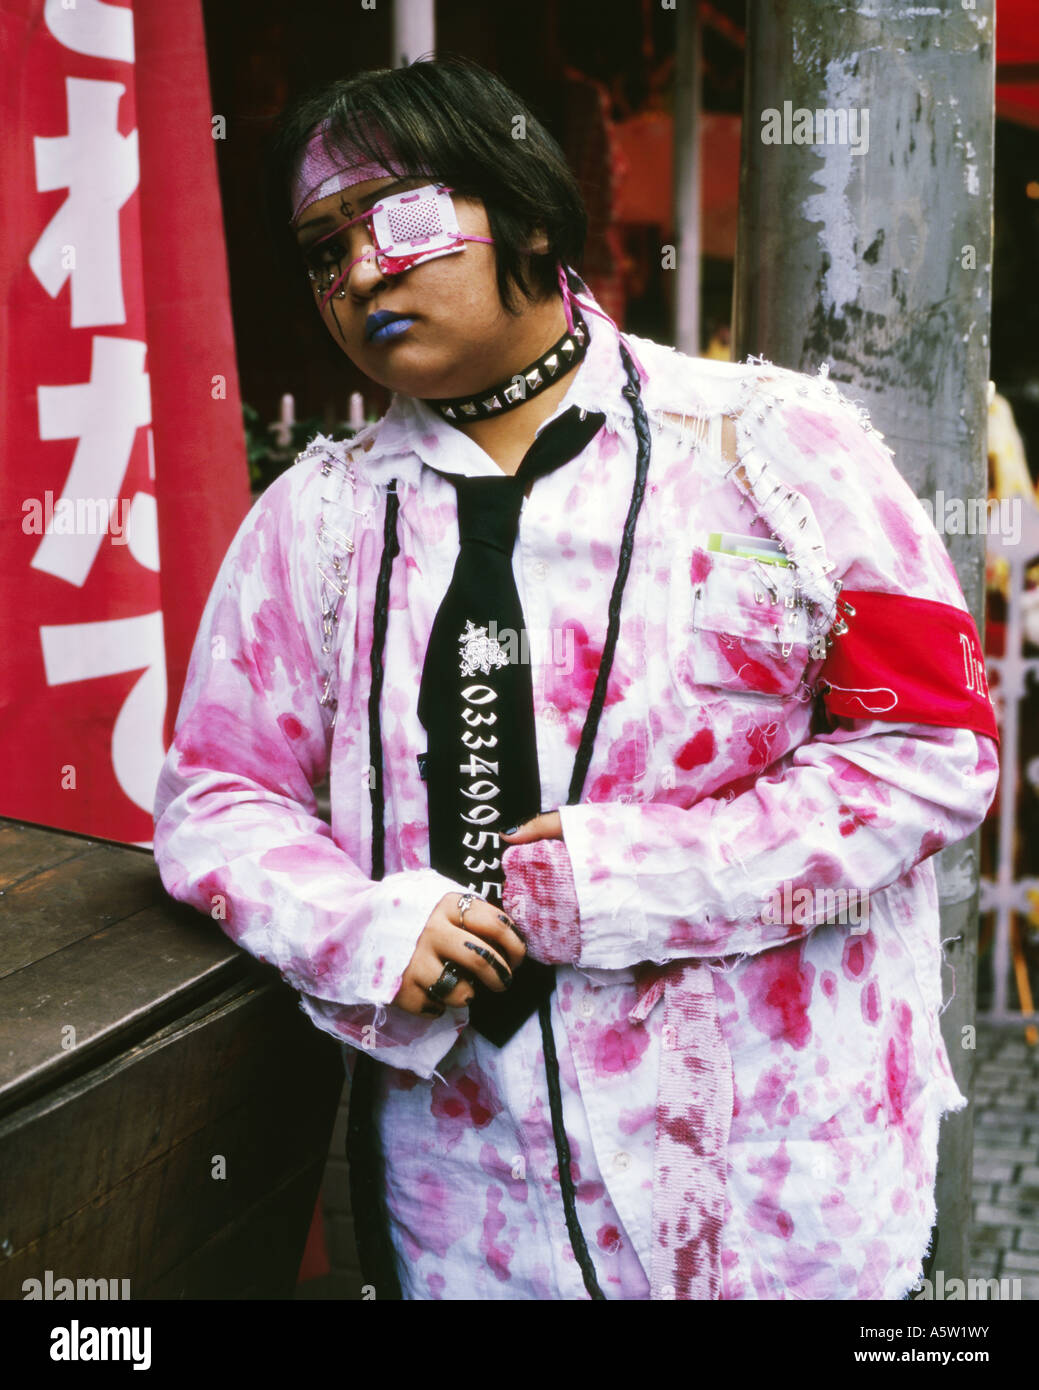 young female punk dressed in outrageous clothes takeshita street harajuku tokyo japan Stock Photo